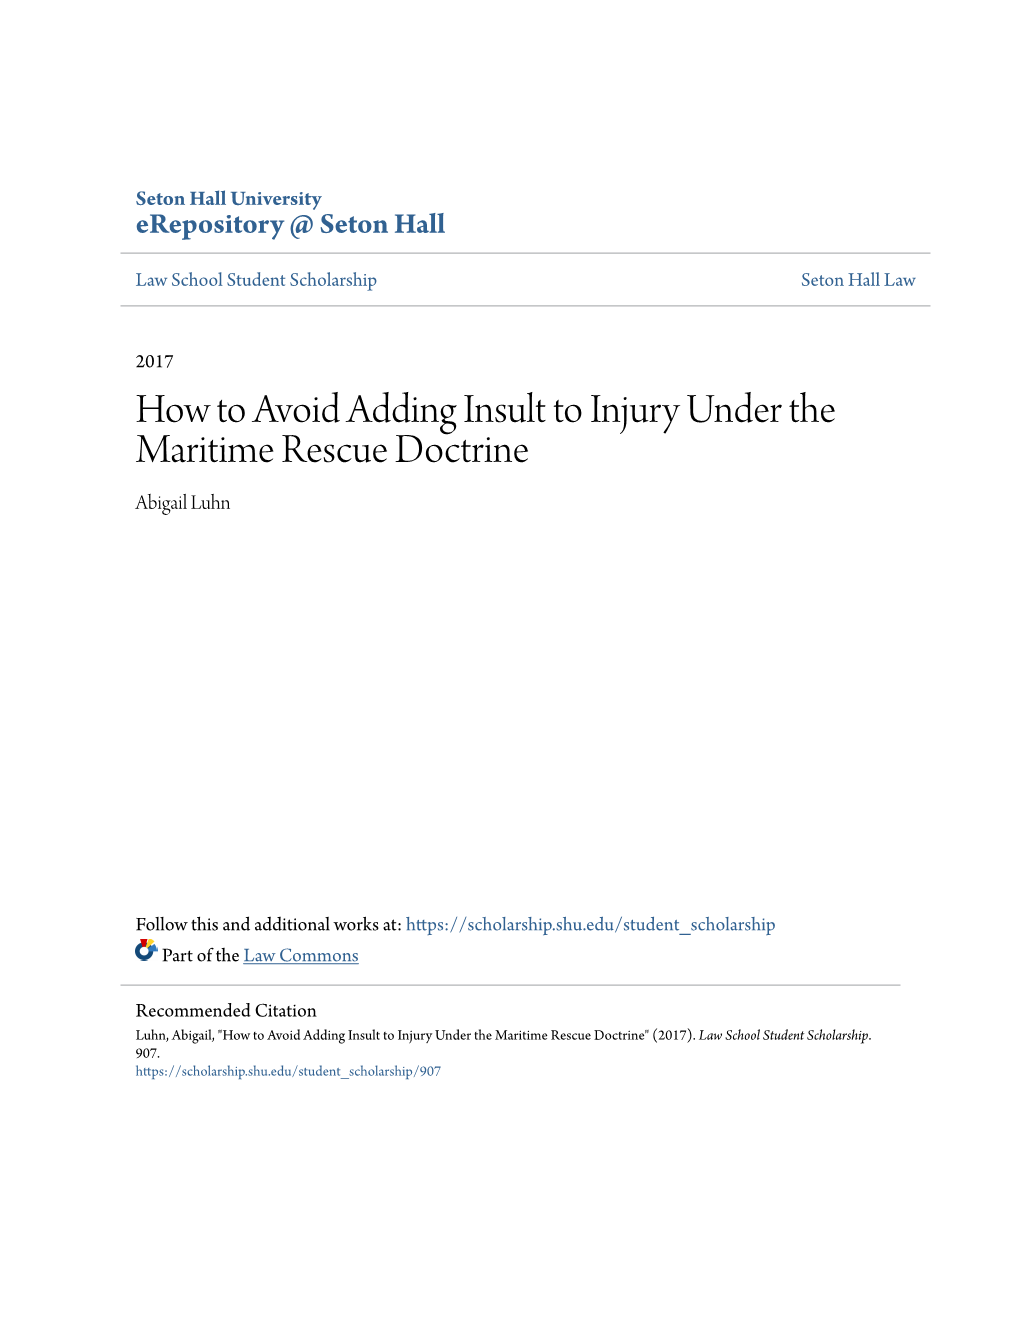 How to Avoid Adding Insult to Injury Under the Maritime Rescue Doctrine Abigail Luhn